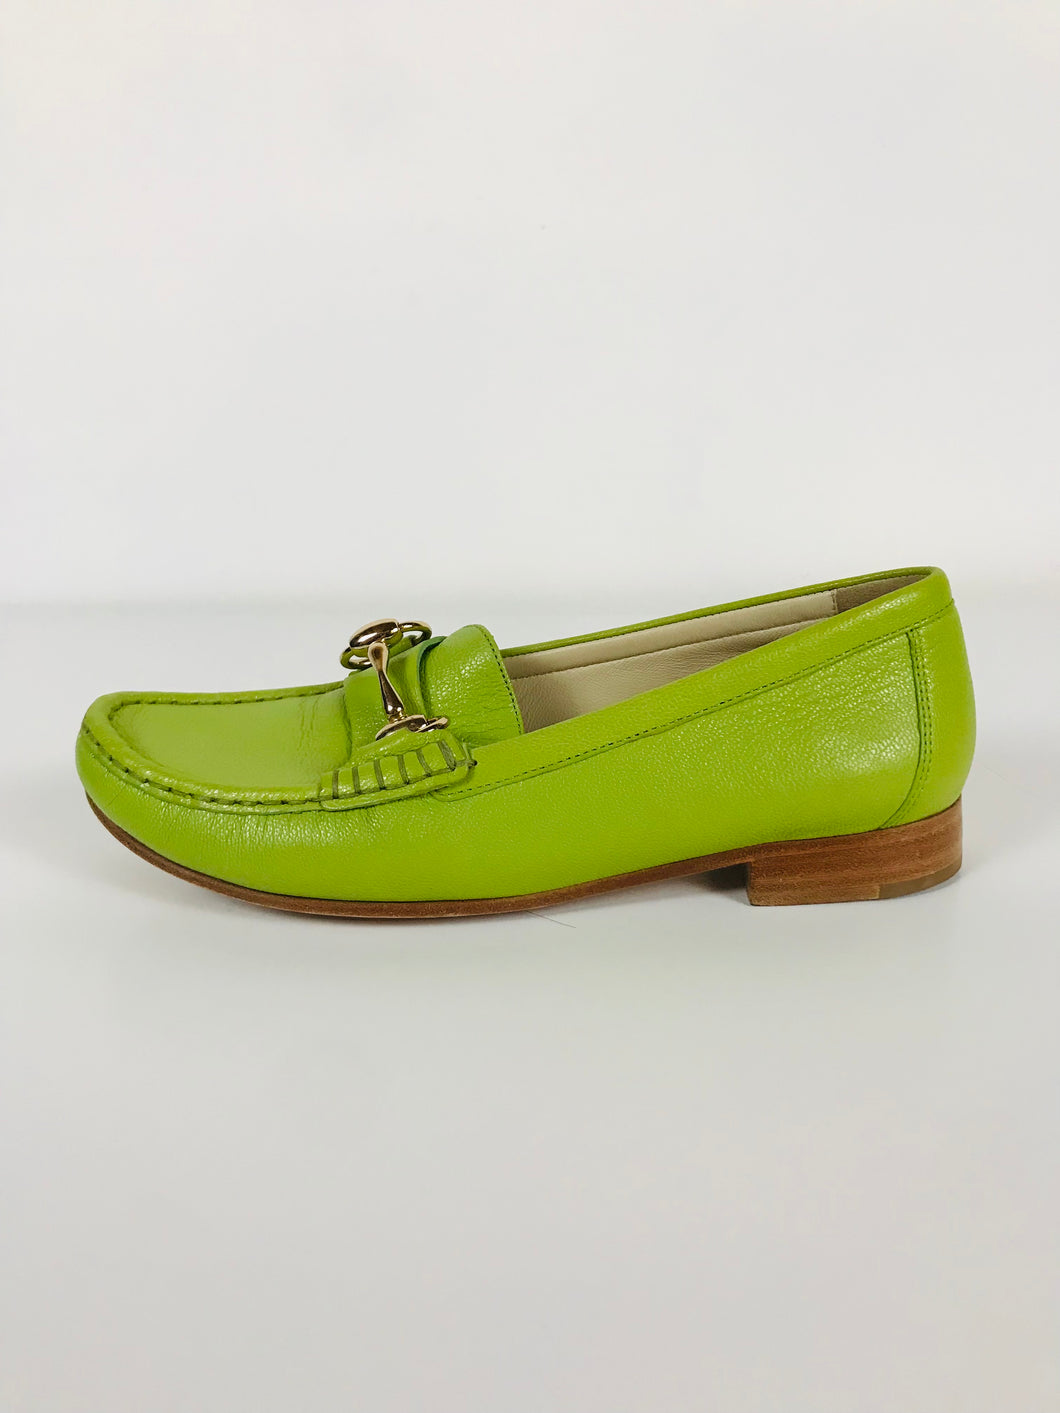 Hogl Women's Leather Loafers Shoes | UK5 | Green